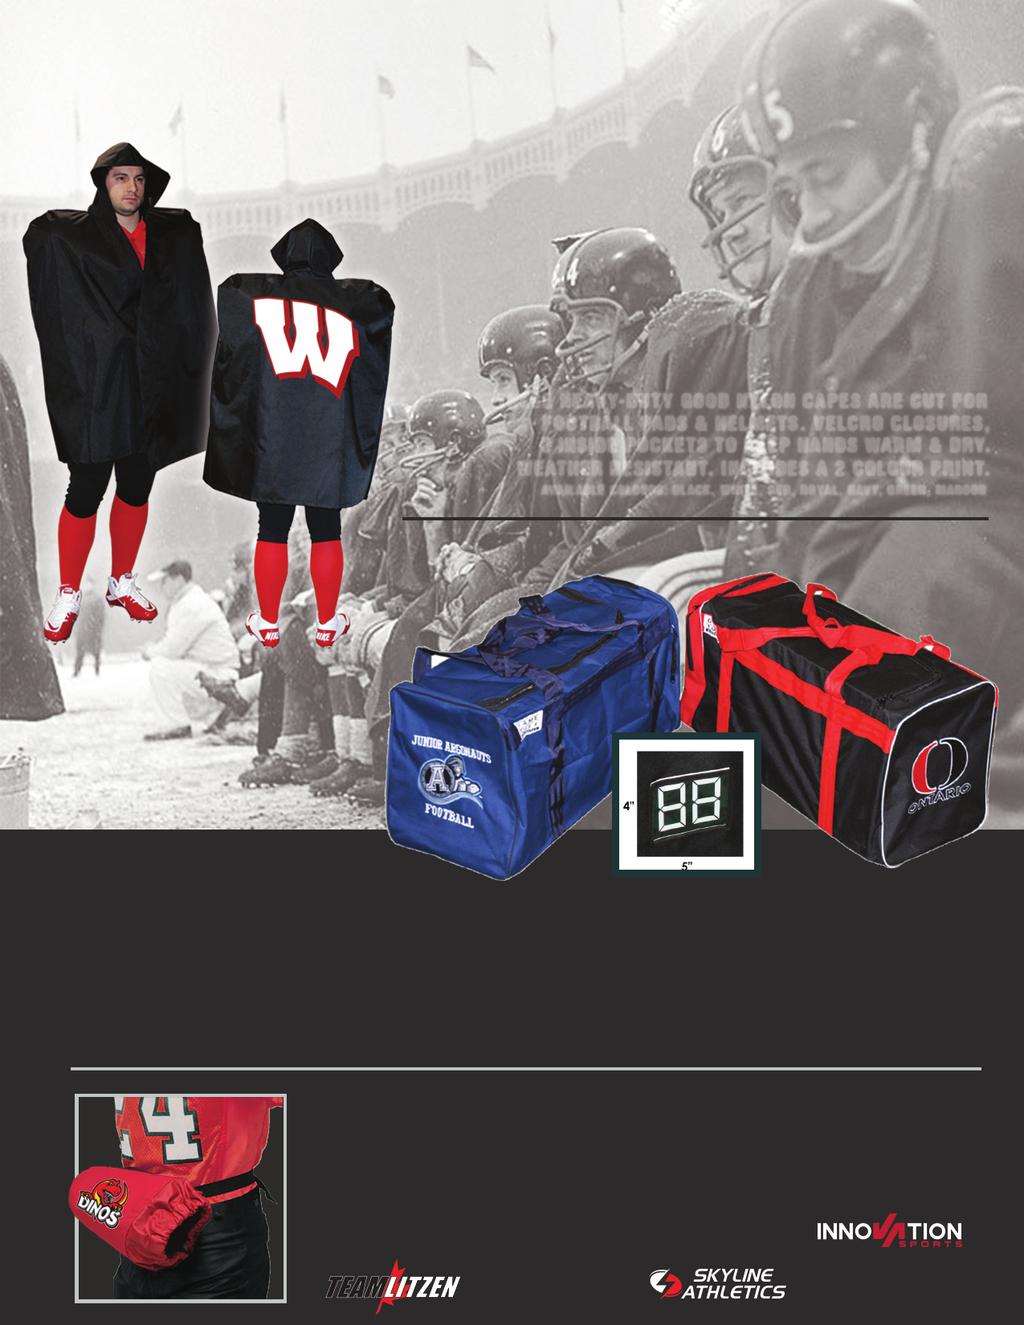 ORDER DEADLINES JAN 26TH - MAY DELIVERY MAR 30TH - AUG DELIVERY FEATURED FOOTBALL SPECIALS SIDELINE CAPE MIN 24 PIECES. UNLINED $49.98 EA CODE: XIM190 THERMAL LINED $59.